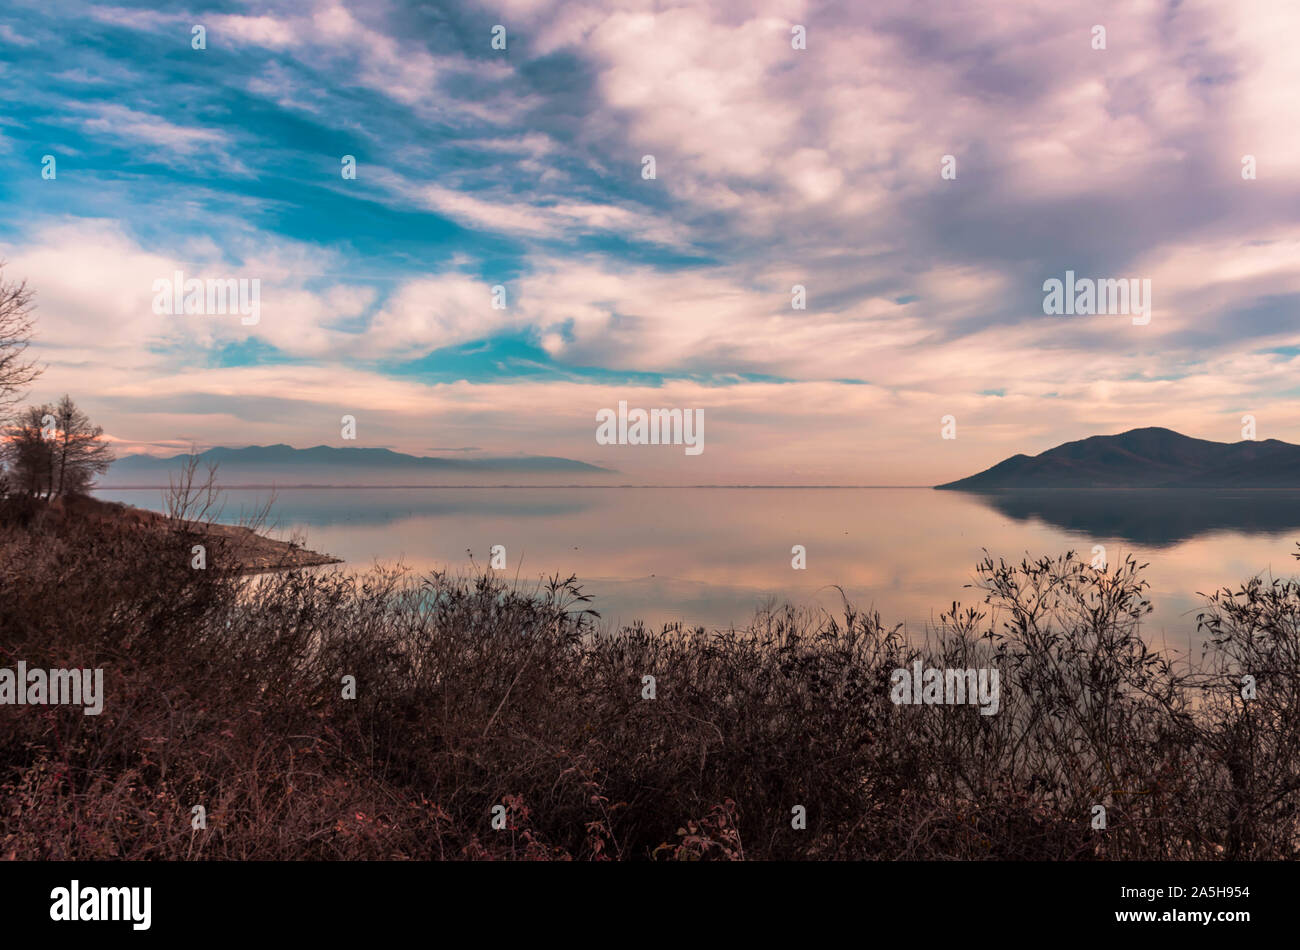 View of lake Kerkini and Beles mountain in Serres. Beautiful lake reflections at sunset time. Stock Photo